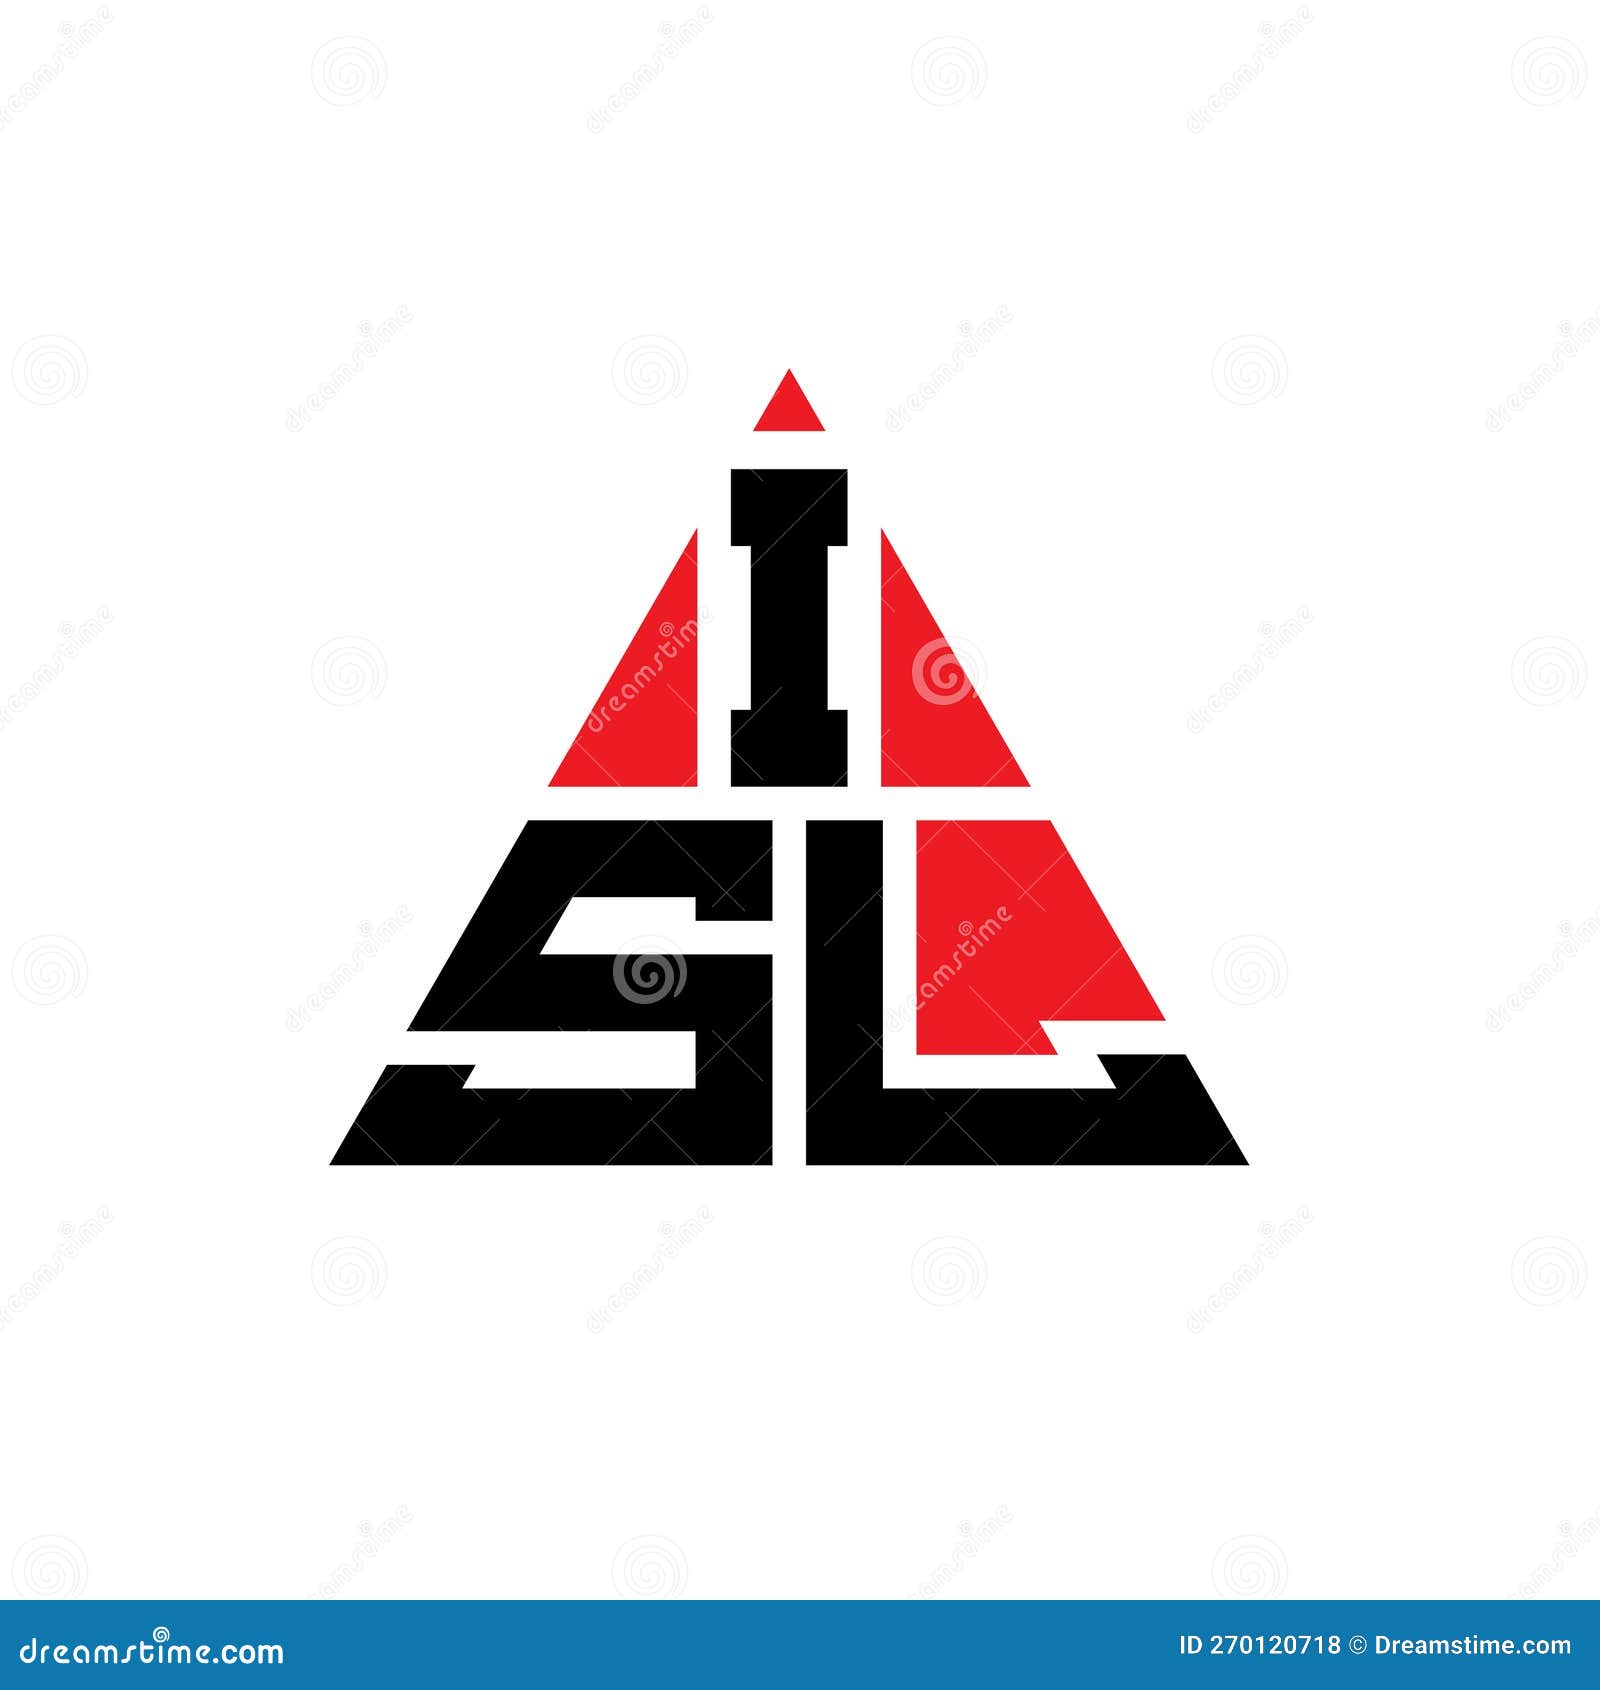 isl triangle letter logo  with triangle . isl triangle logo  monogram. isl triangle  logo template with red